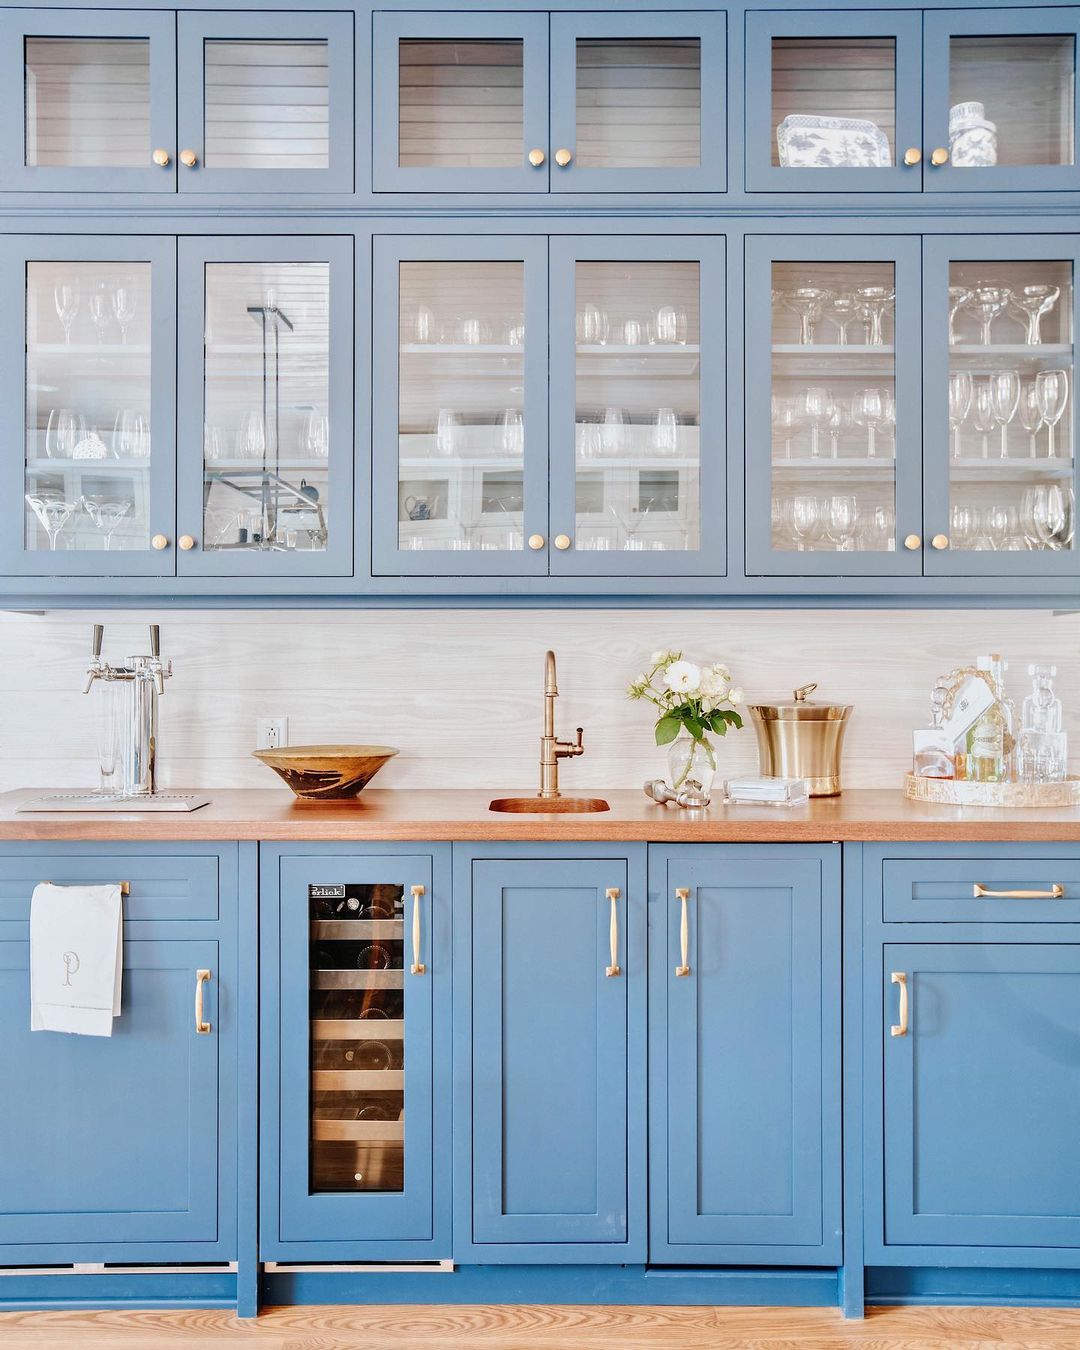 Kitchen with light blue cabinetry and drawers. Photo by Instagram user @loganelizabethdesigns